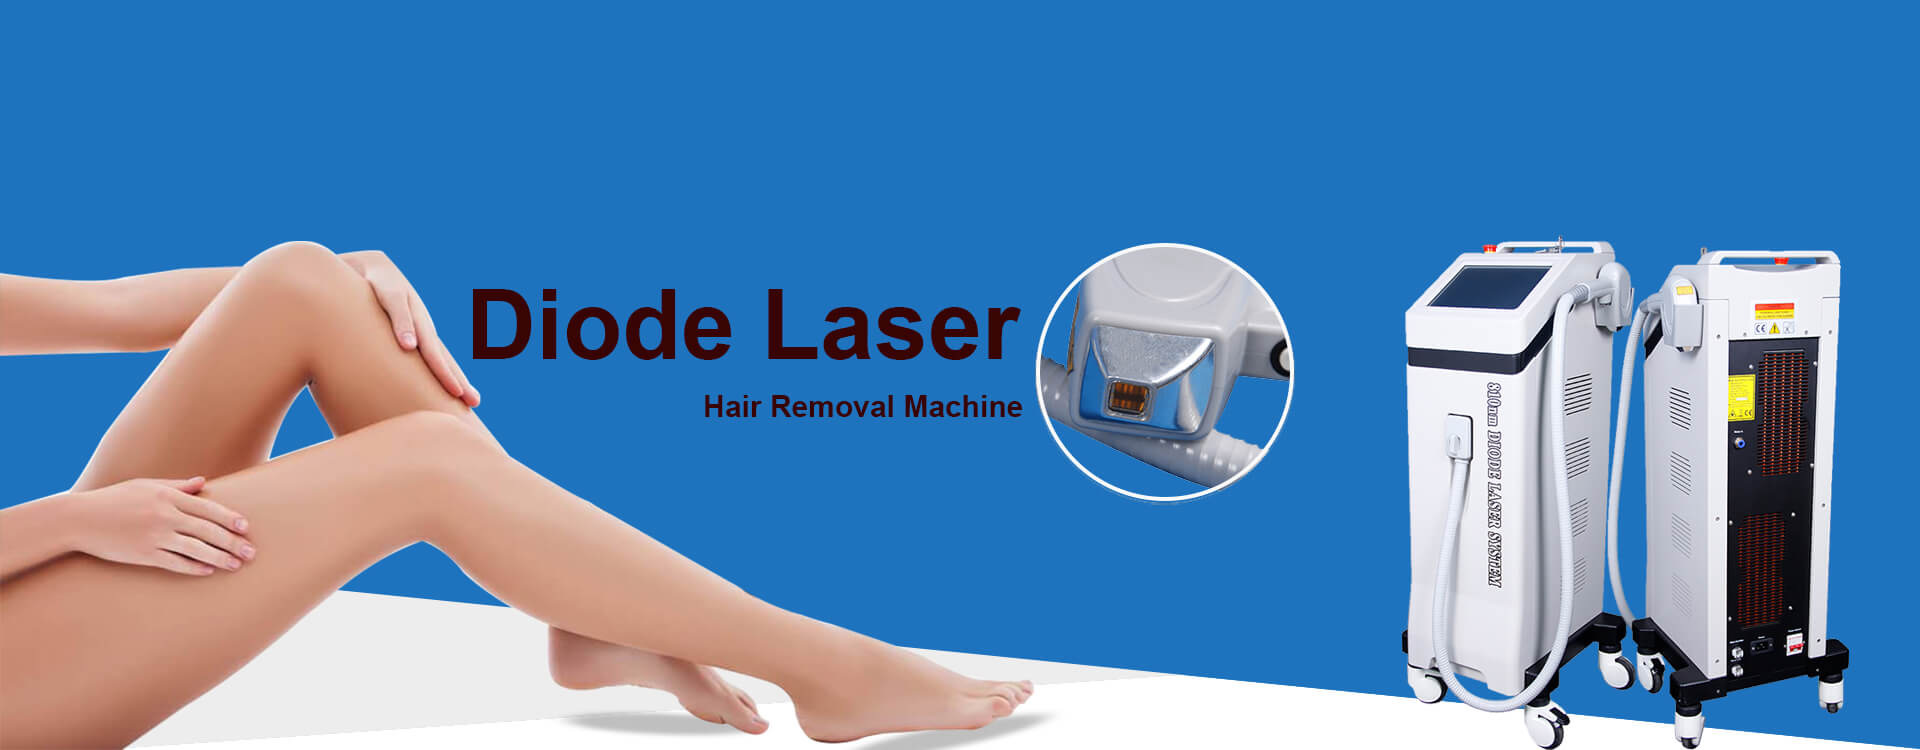 Best Permanent Diode Laser Hair Removal Machine